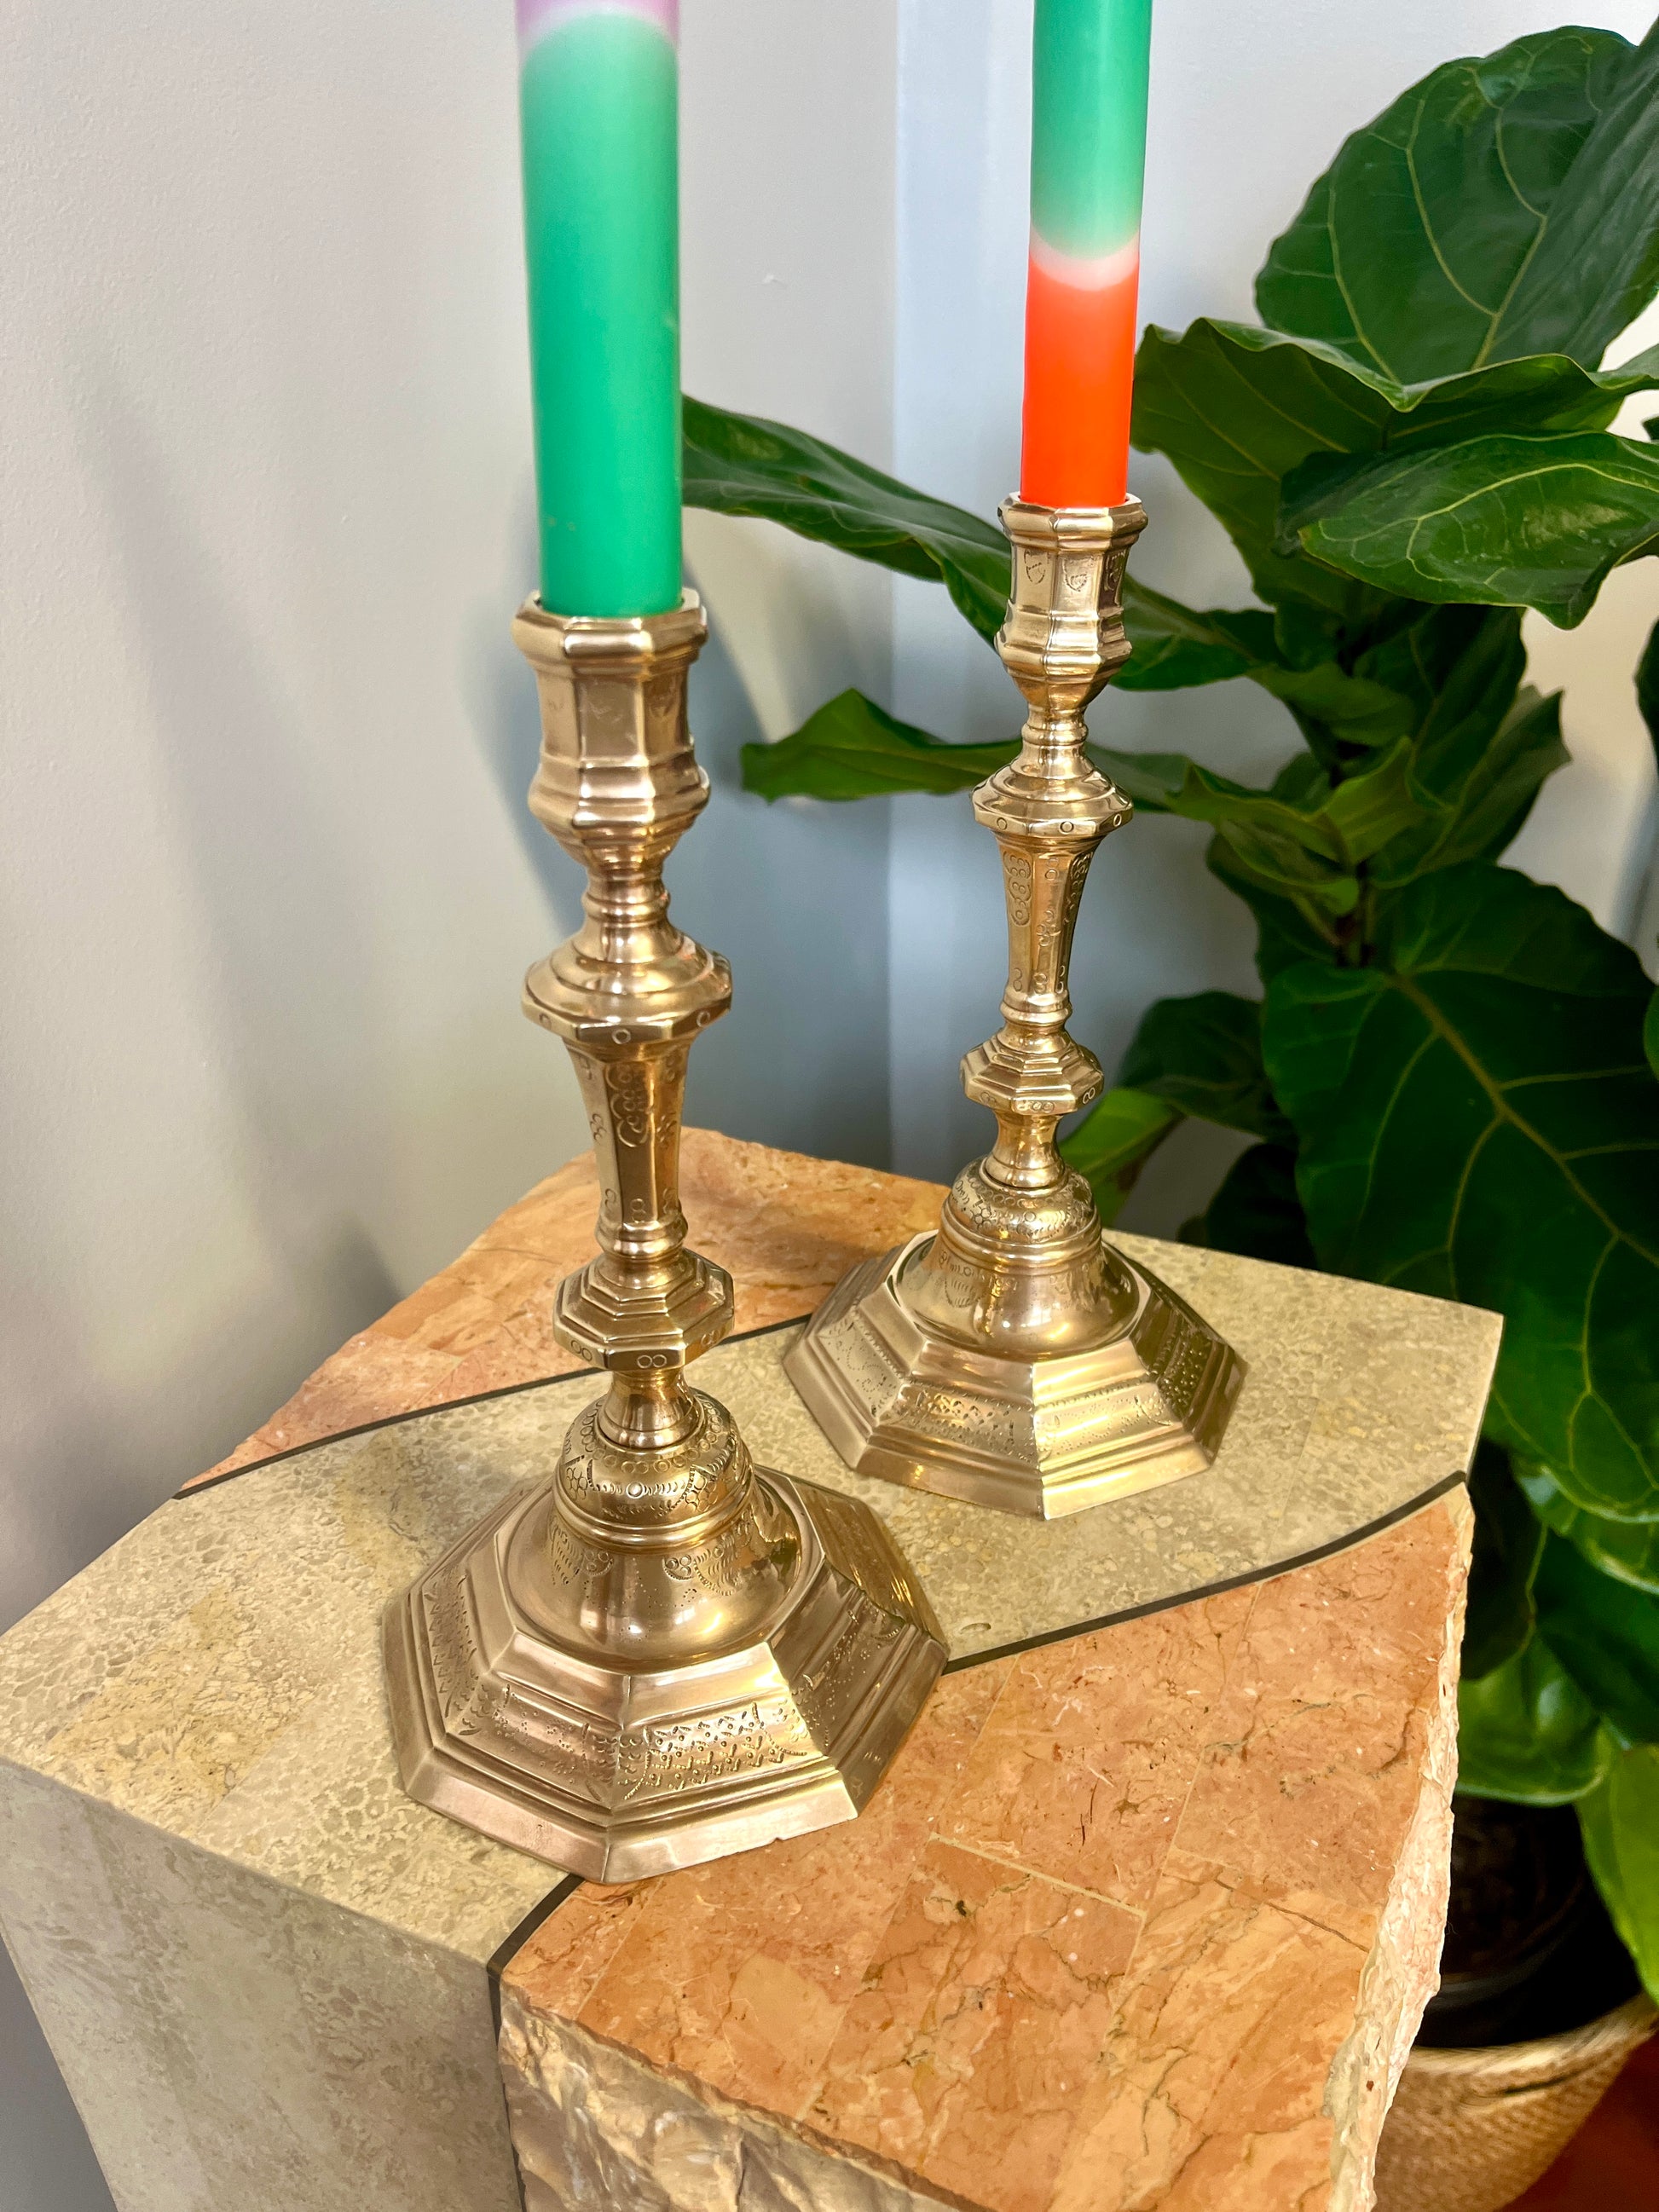 Mottahedeh Vintage Collectible Brass Candlesticks